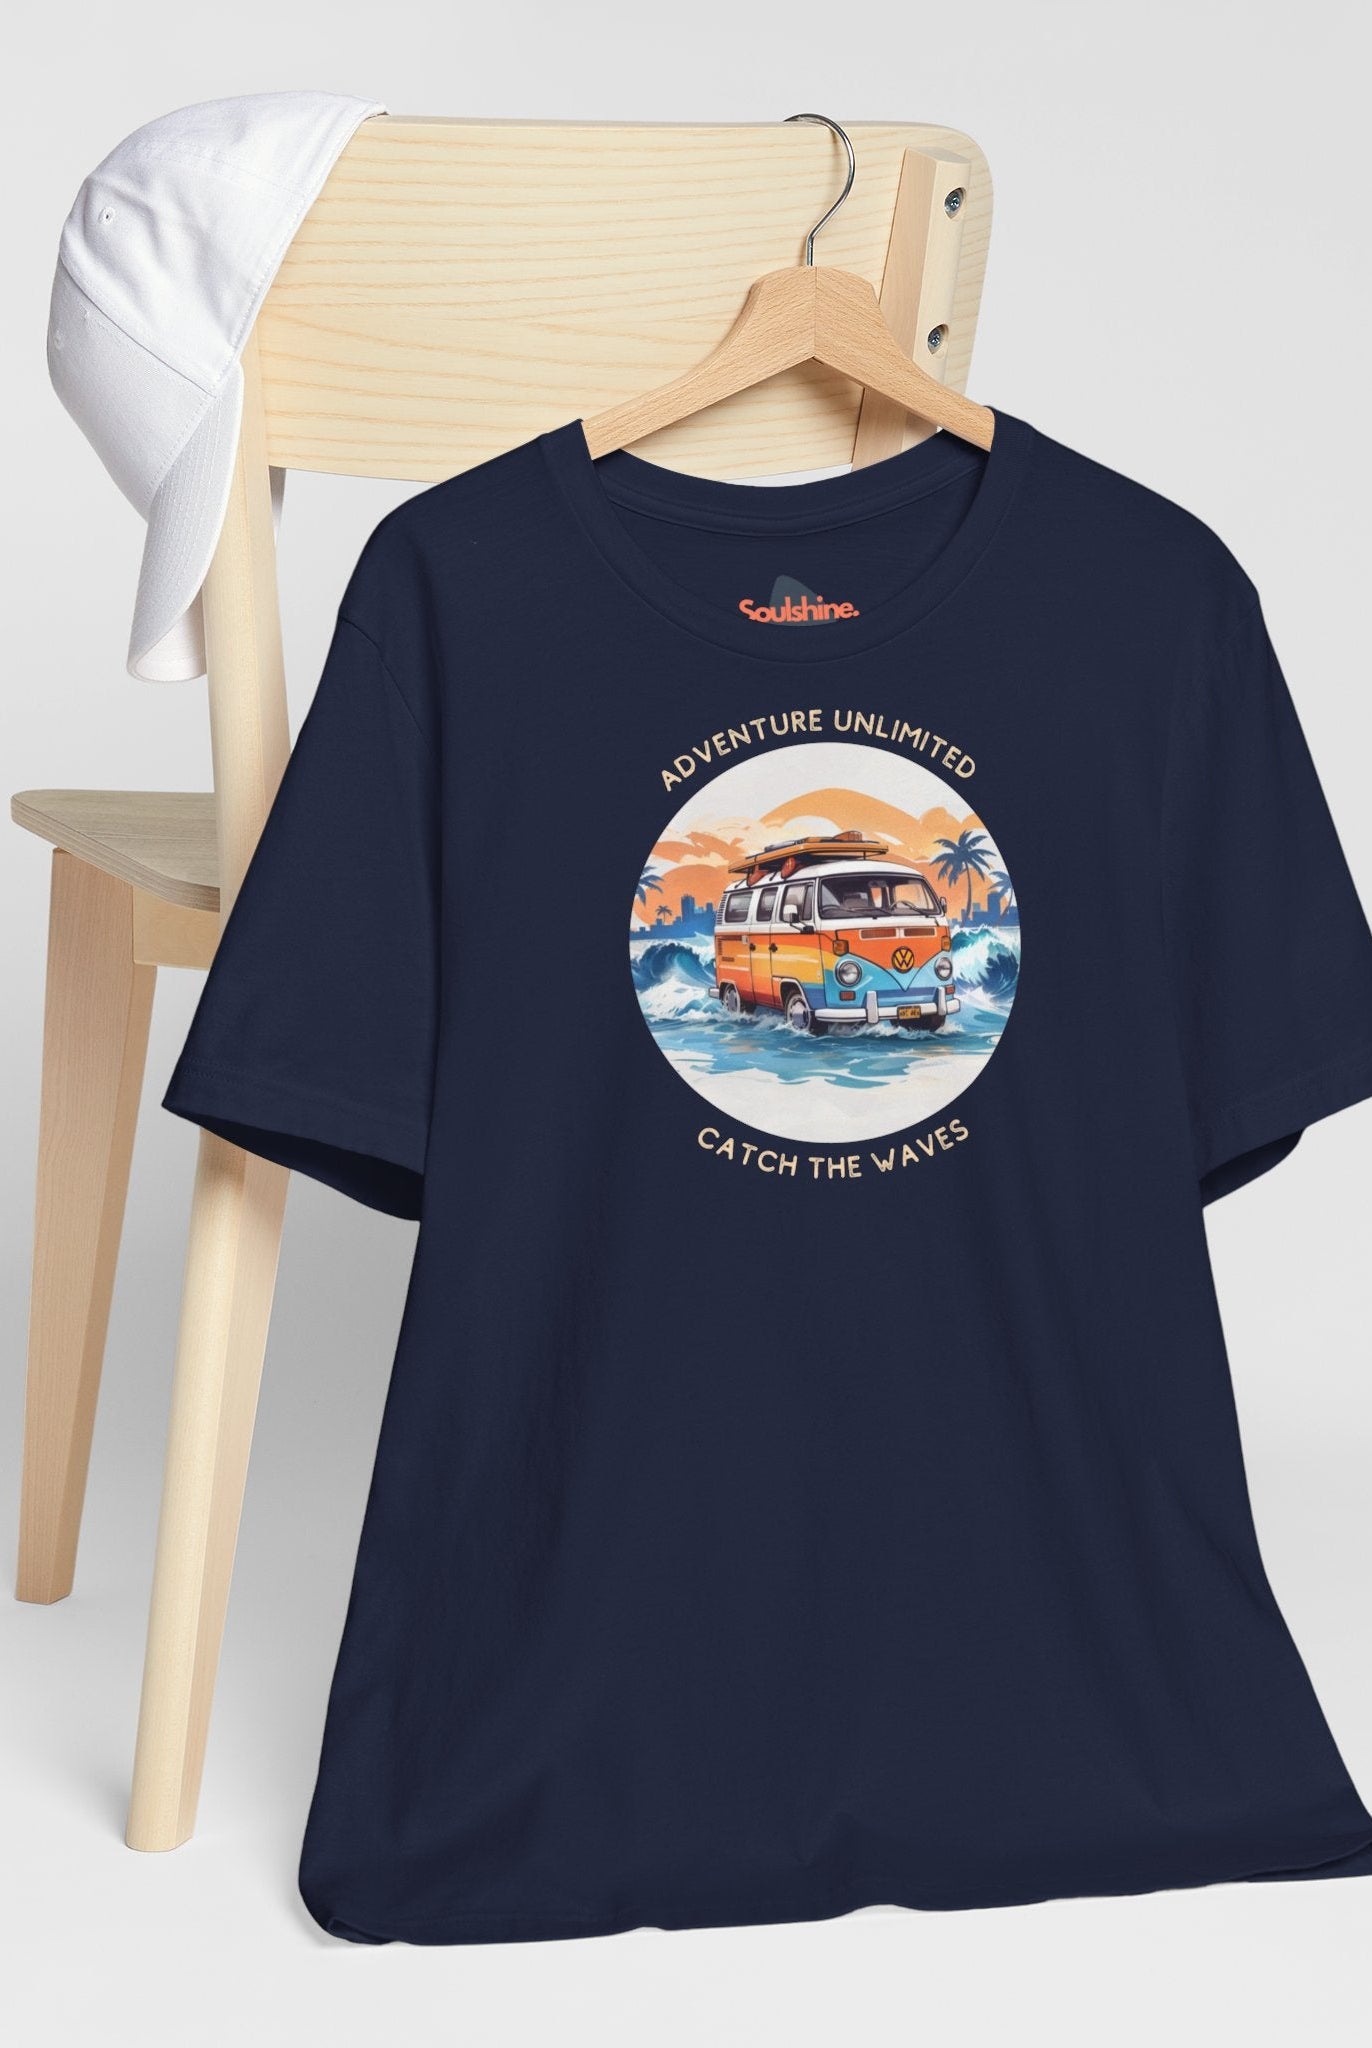 Adventure Unlimited Surfing T-Shirt featuring sunset graphic on navy Bella & Canvas EU printed item